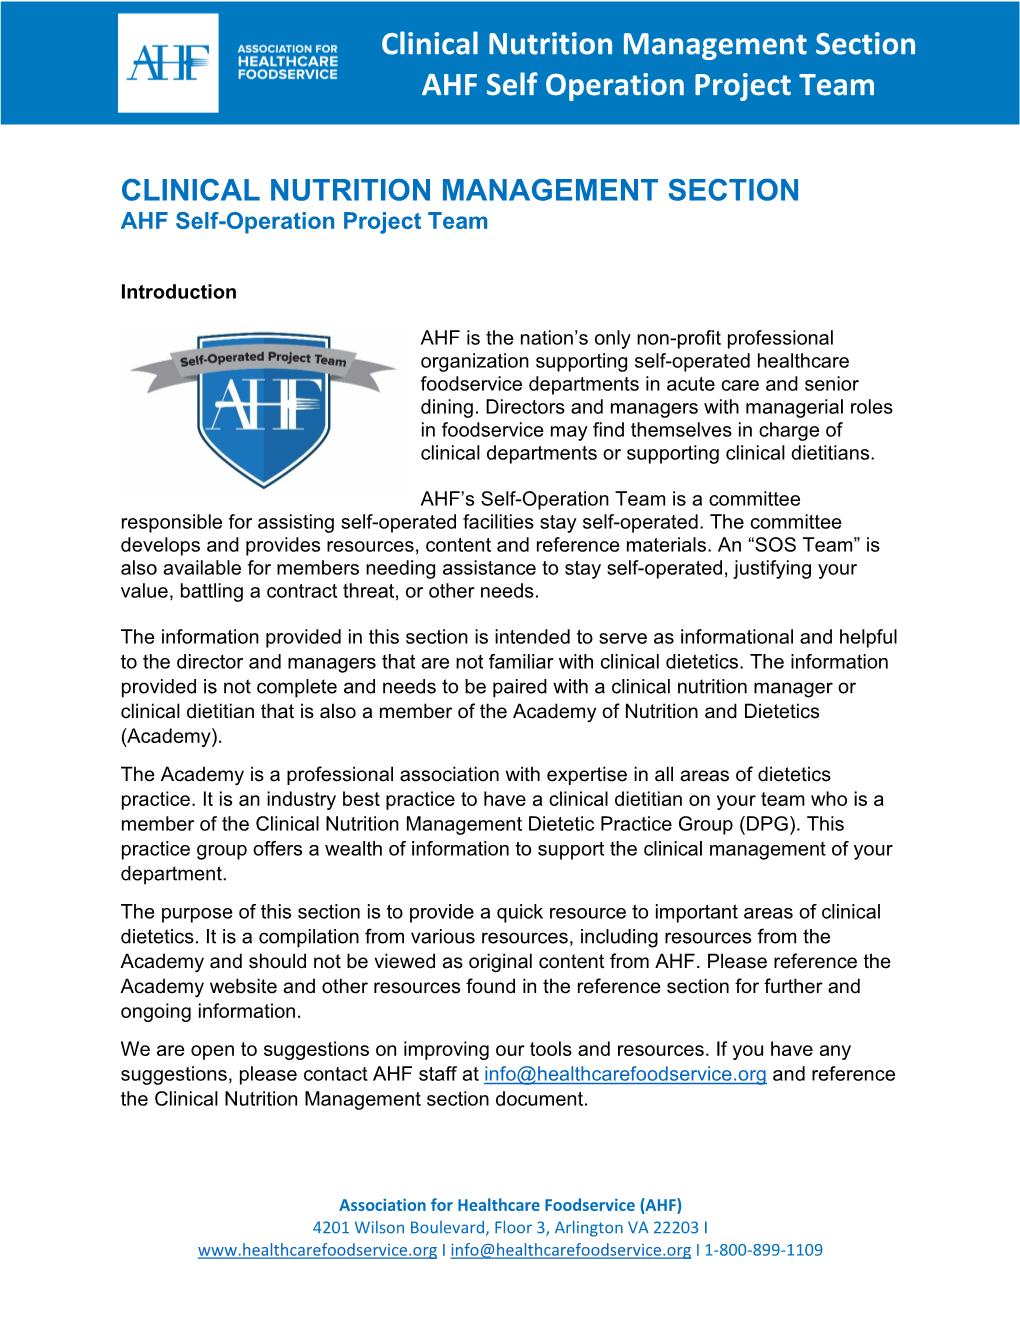 Clinical Nutrition Management Section AHF Self Operation Project Team